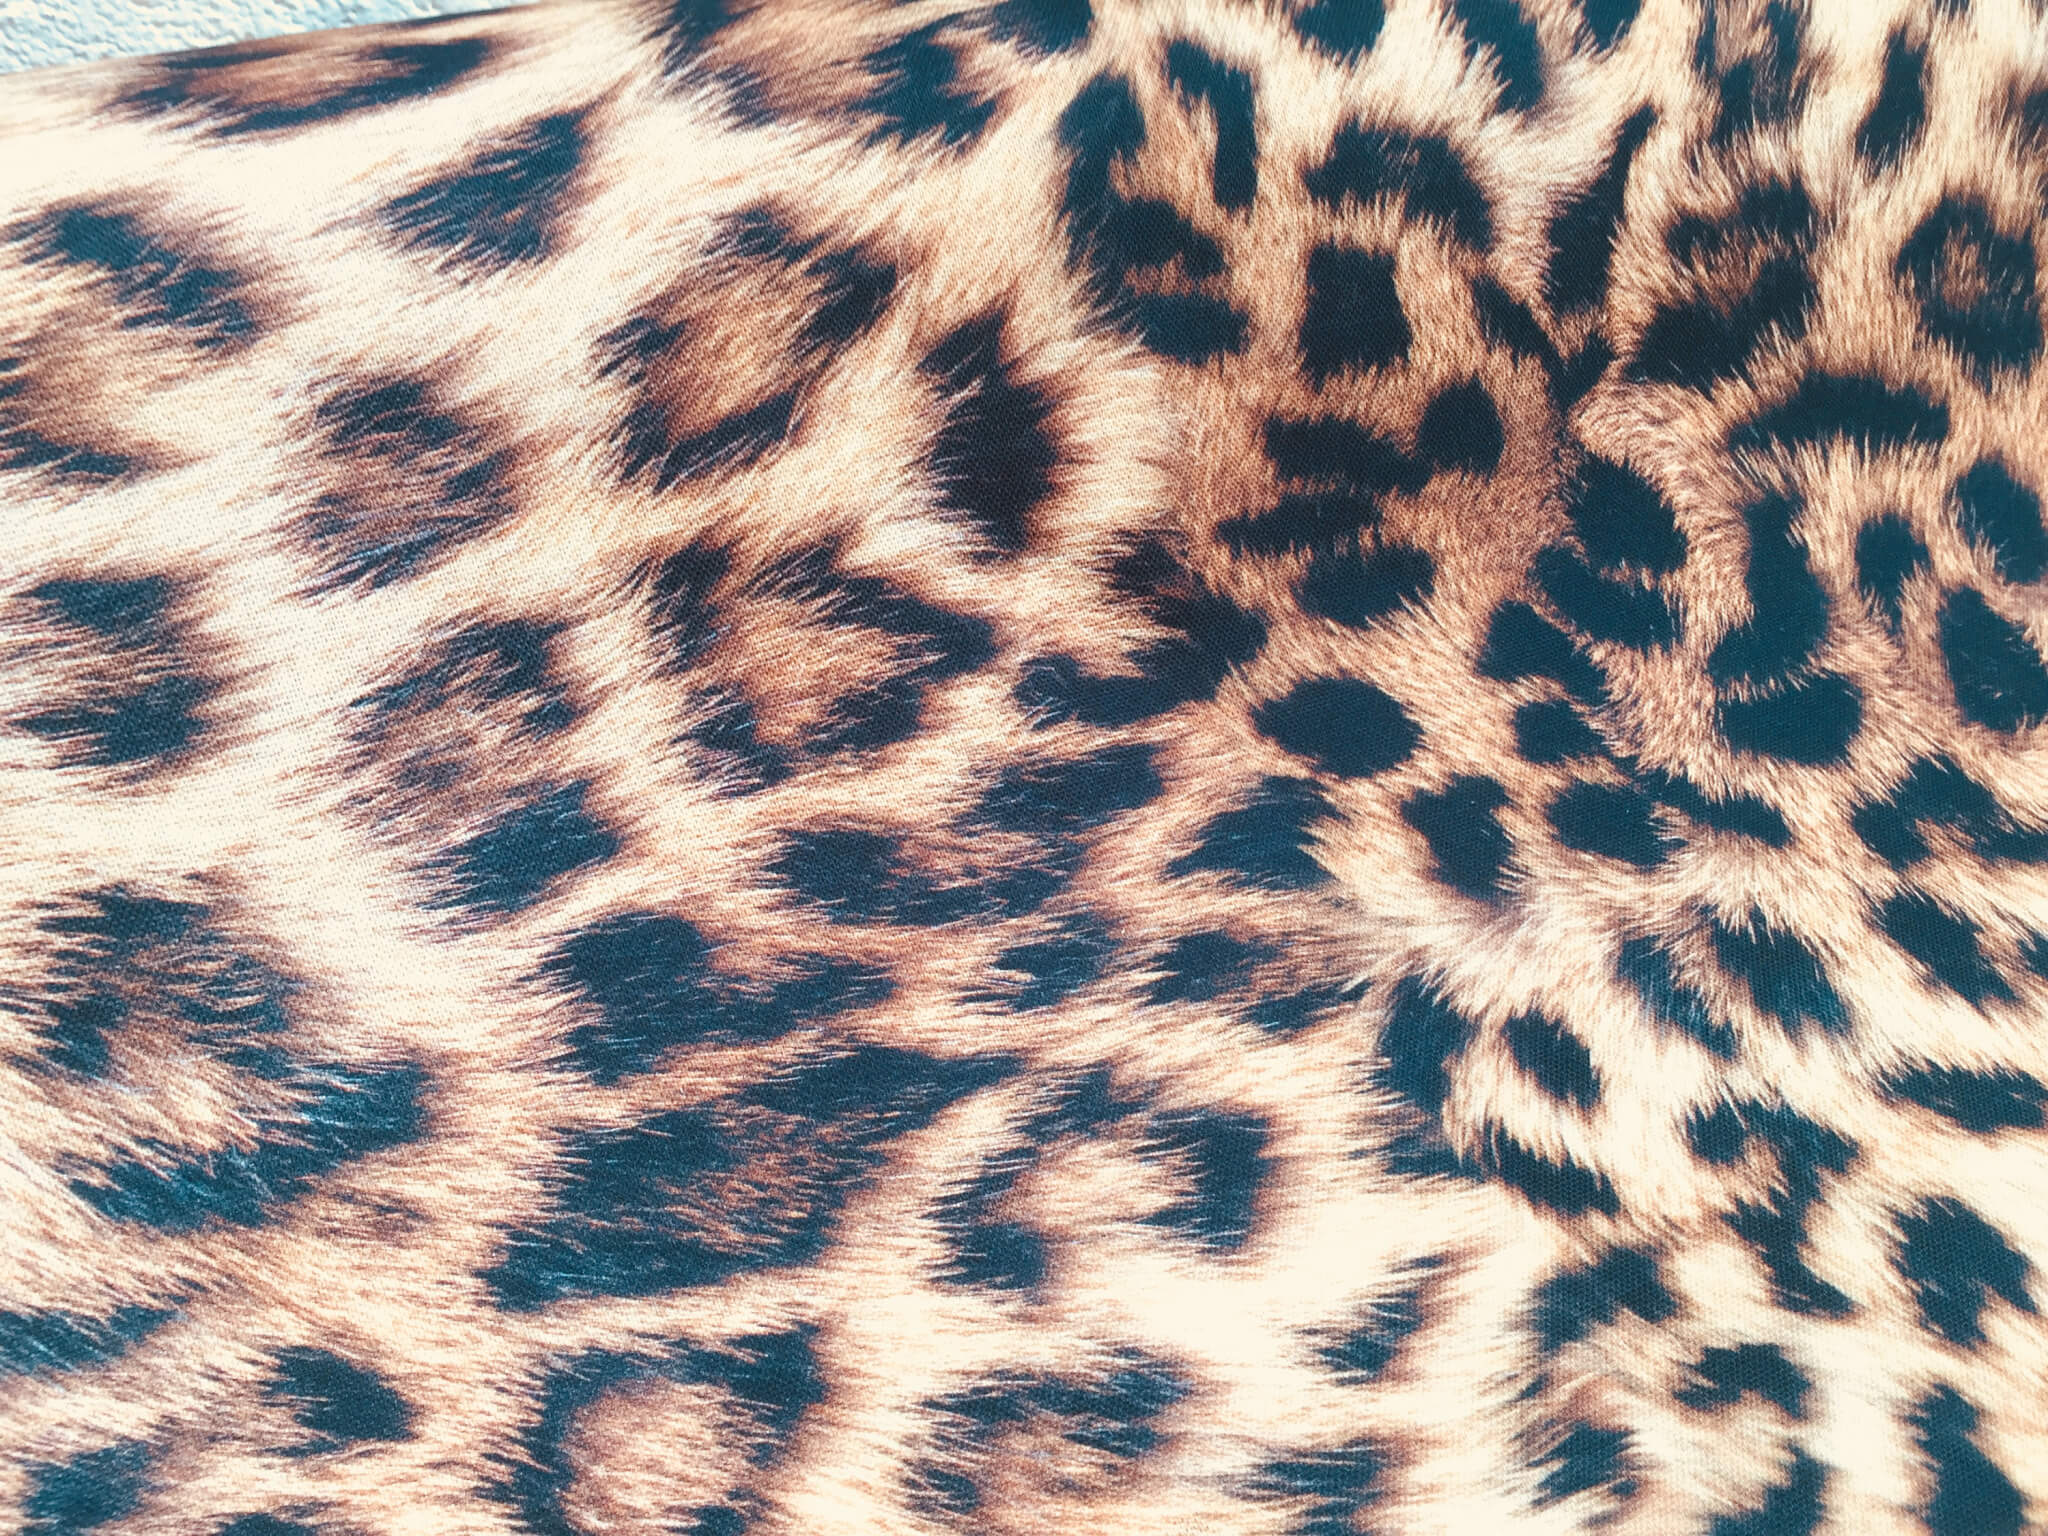 https://lushfabric.com/wp-content/uploads/2018/06/leopard-print-cotton-fabric-for-curtains-upholstery-panther-animal-fur-digital-print-material-110-extra-wide-5b1855391.jpg